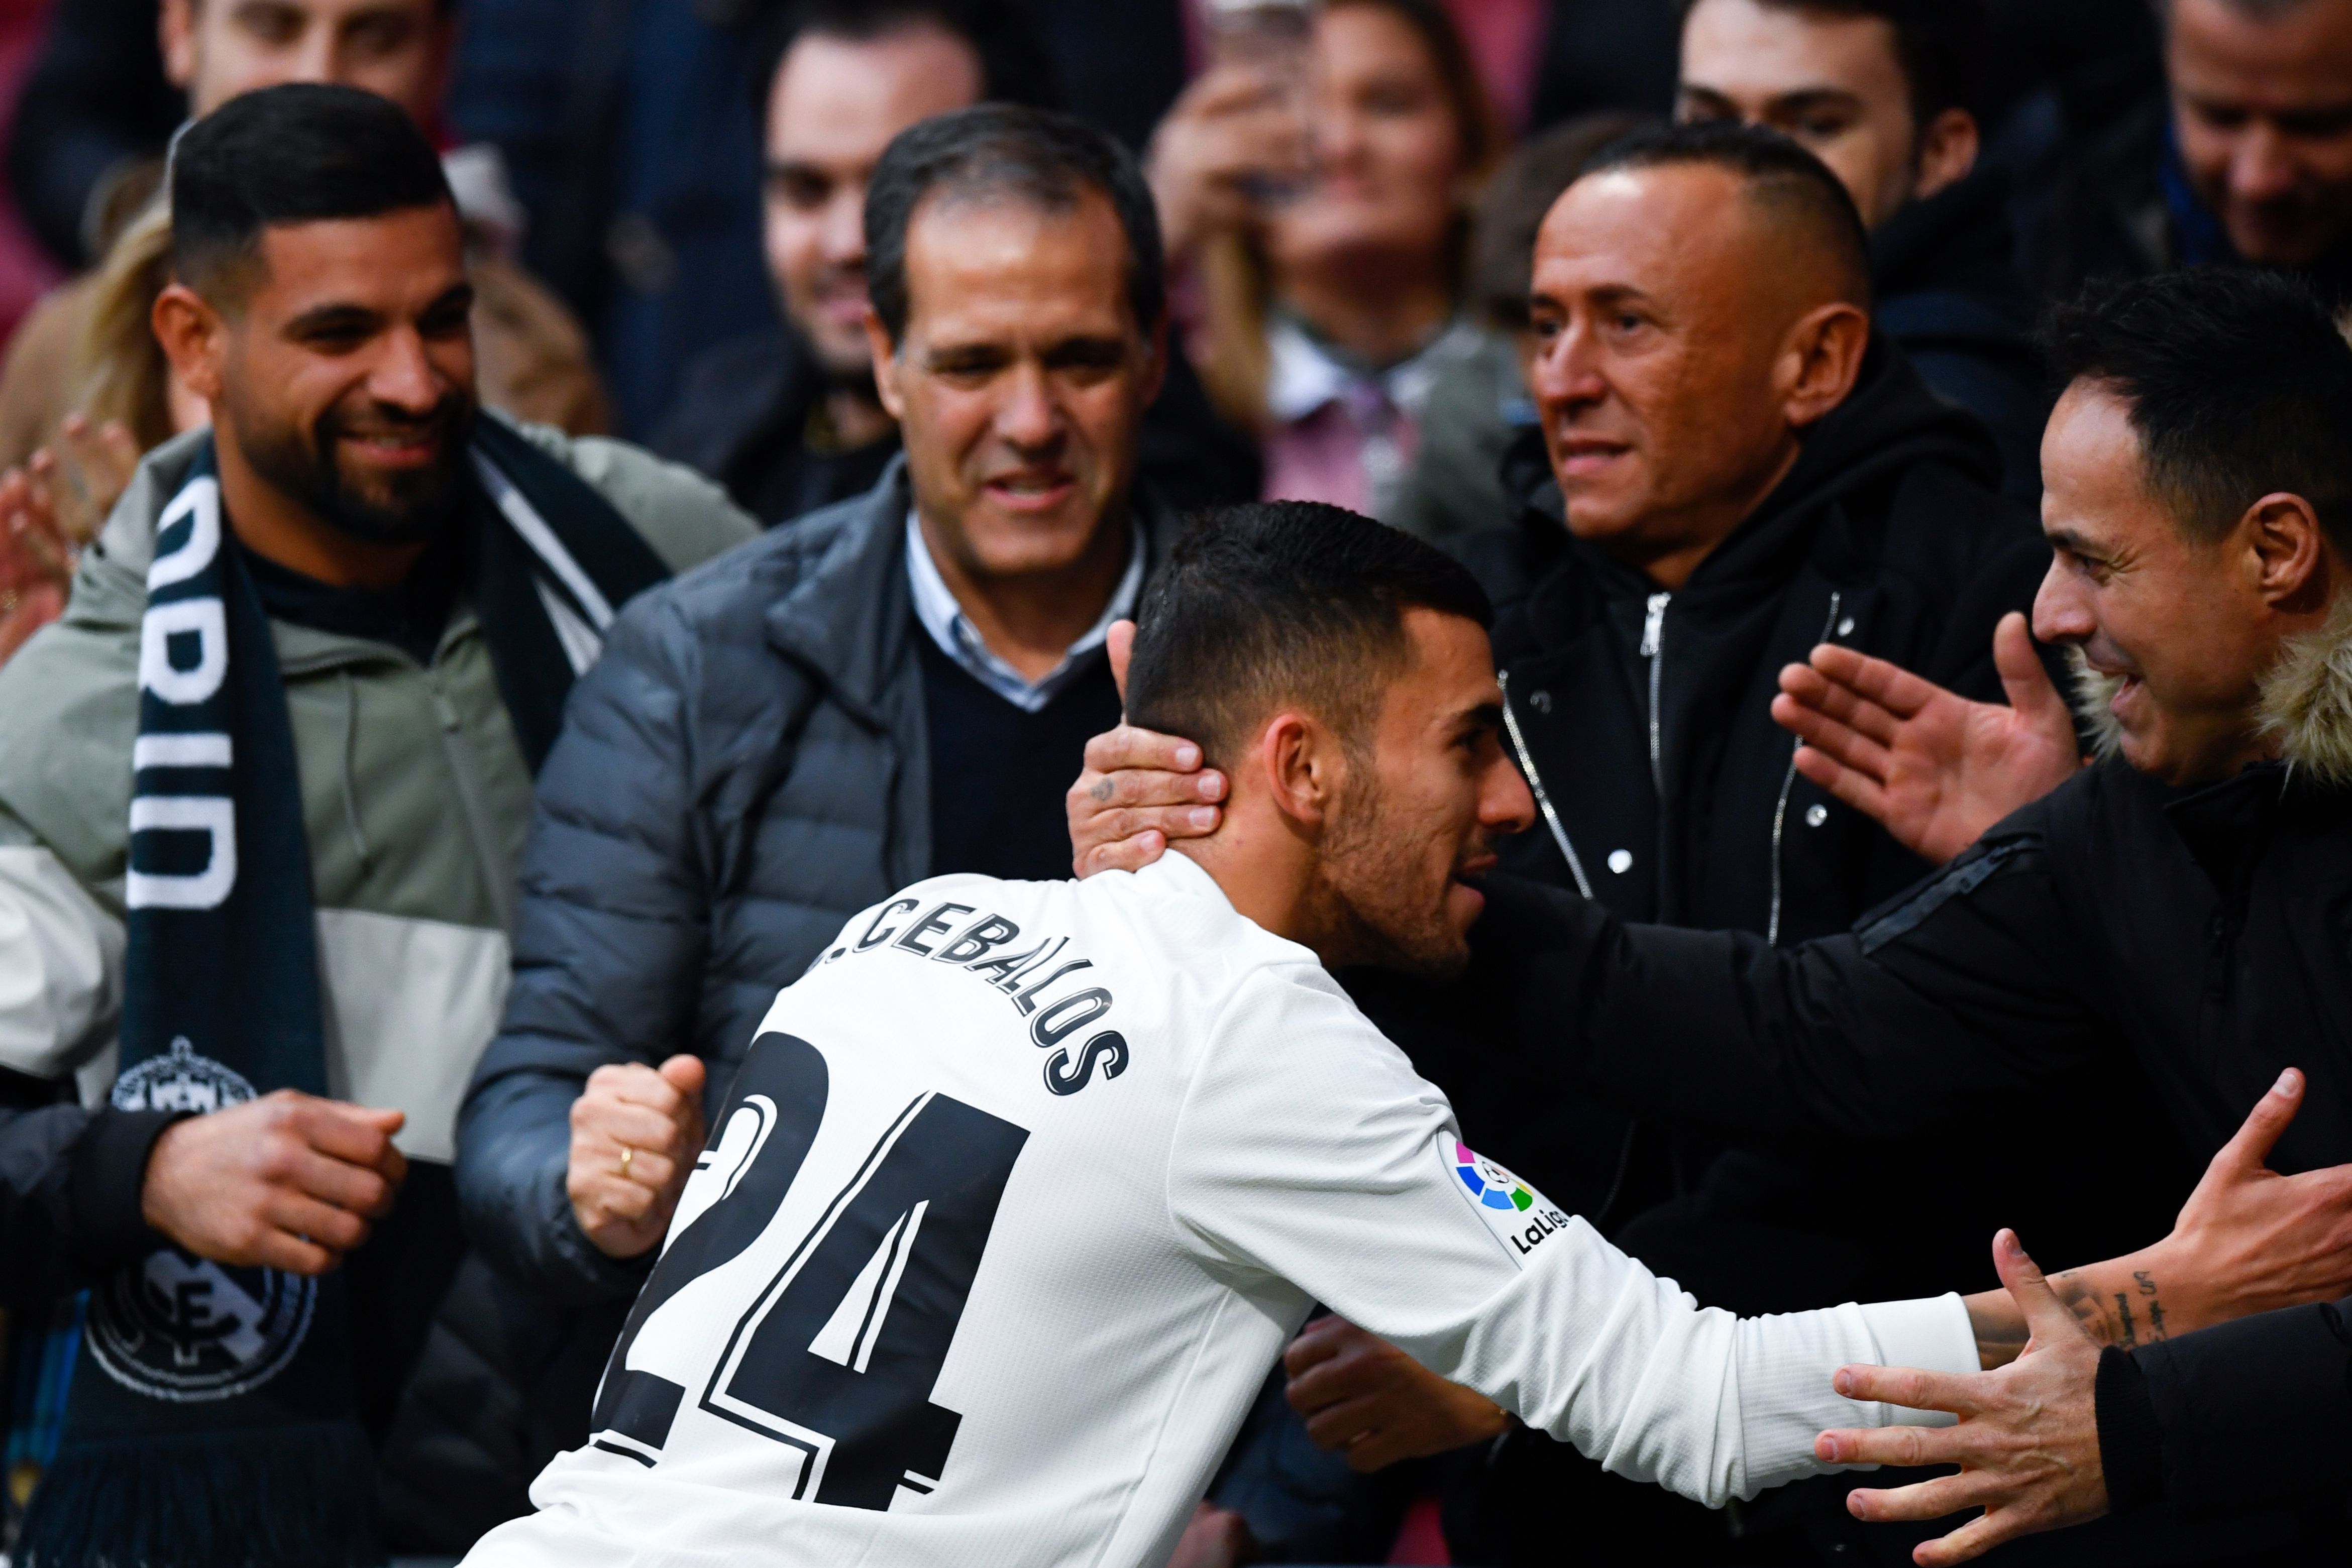 Real Madrid's Spanish midfielder Daniel Ceballos (C) is congratulated at the end of the Spanish league football match between Club Atletico de Madrid and Real Madrid CF at the Wanda Metropolitano stadium in Madrid on February 9, 2019. (Photo by GABRIEL BOUYS / AFP)        (Photo credit should read GABRIEL BOUYS/AFP/Getty Images)